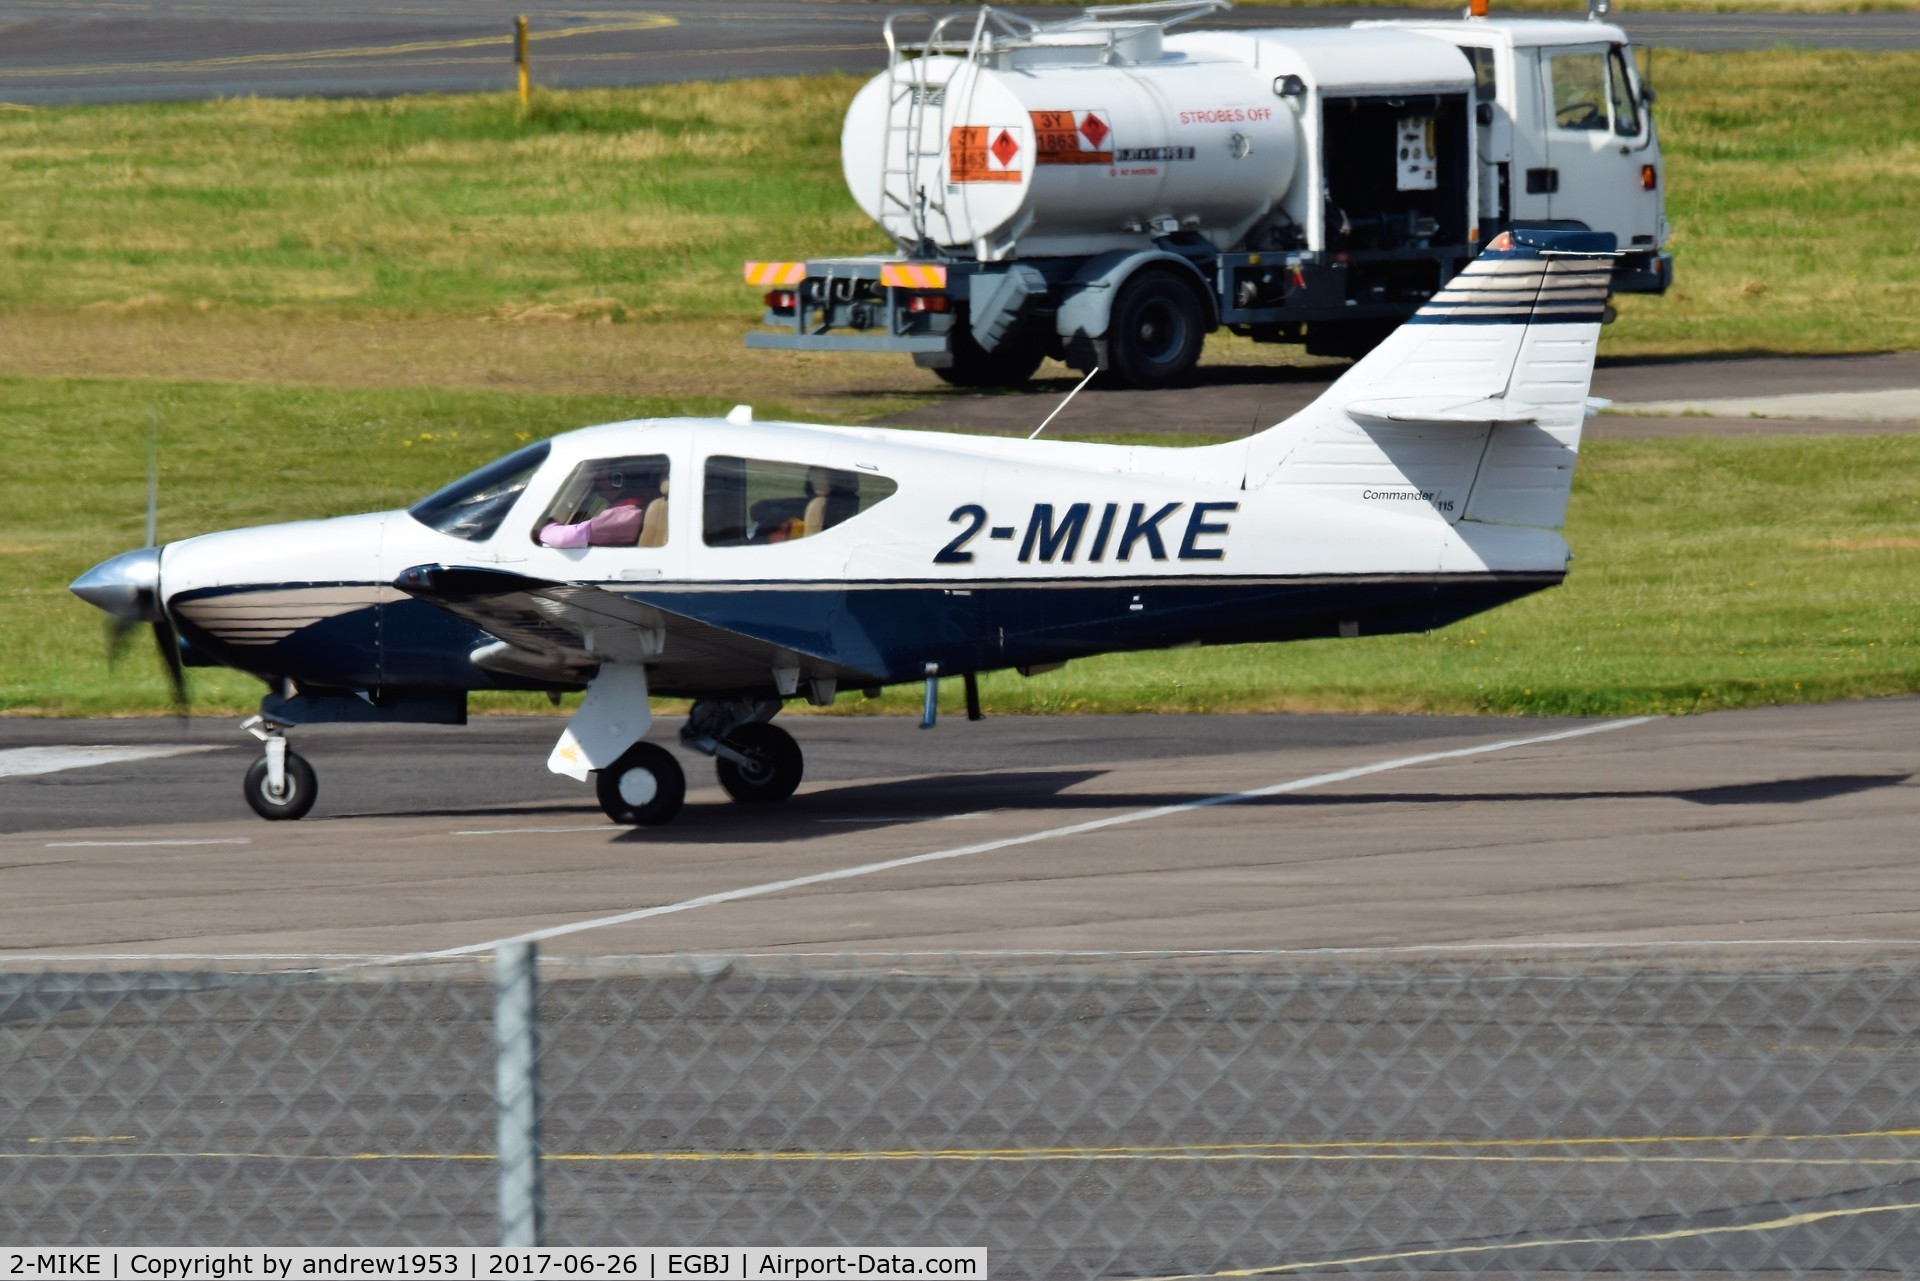 2-MIKE, 2000 Rockwell Commander 114B C/N 14676, 2-MIKE at Gloucestershire Airport.